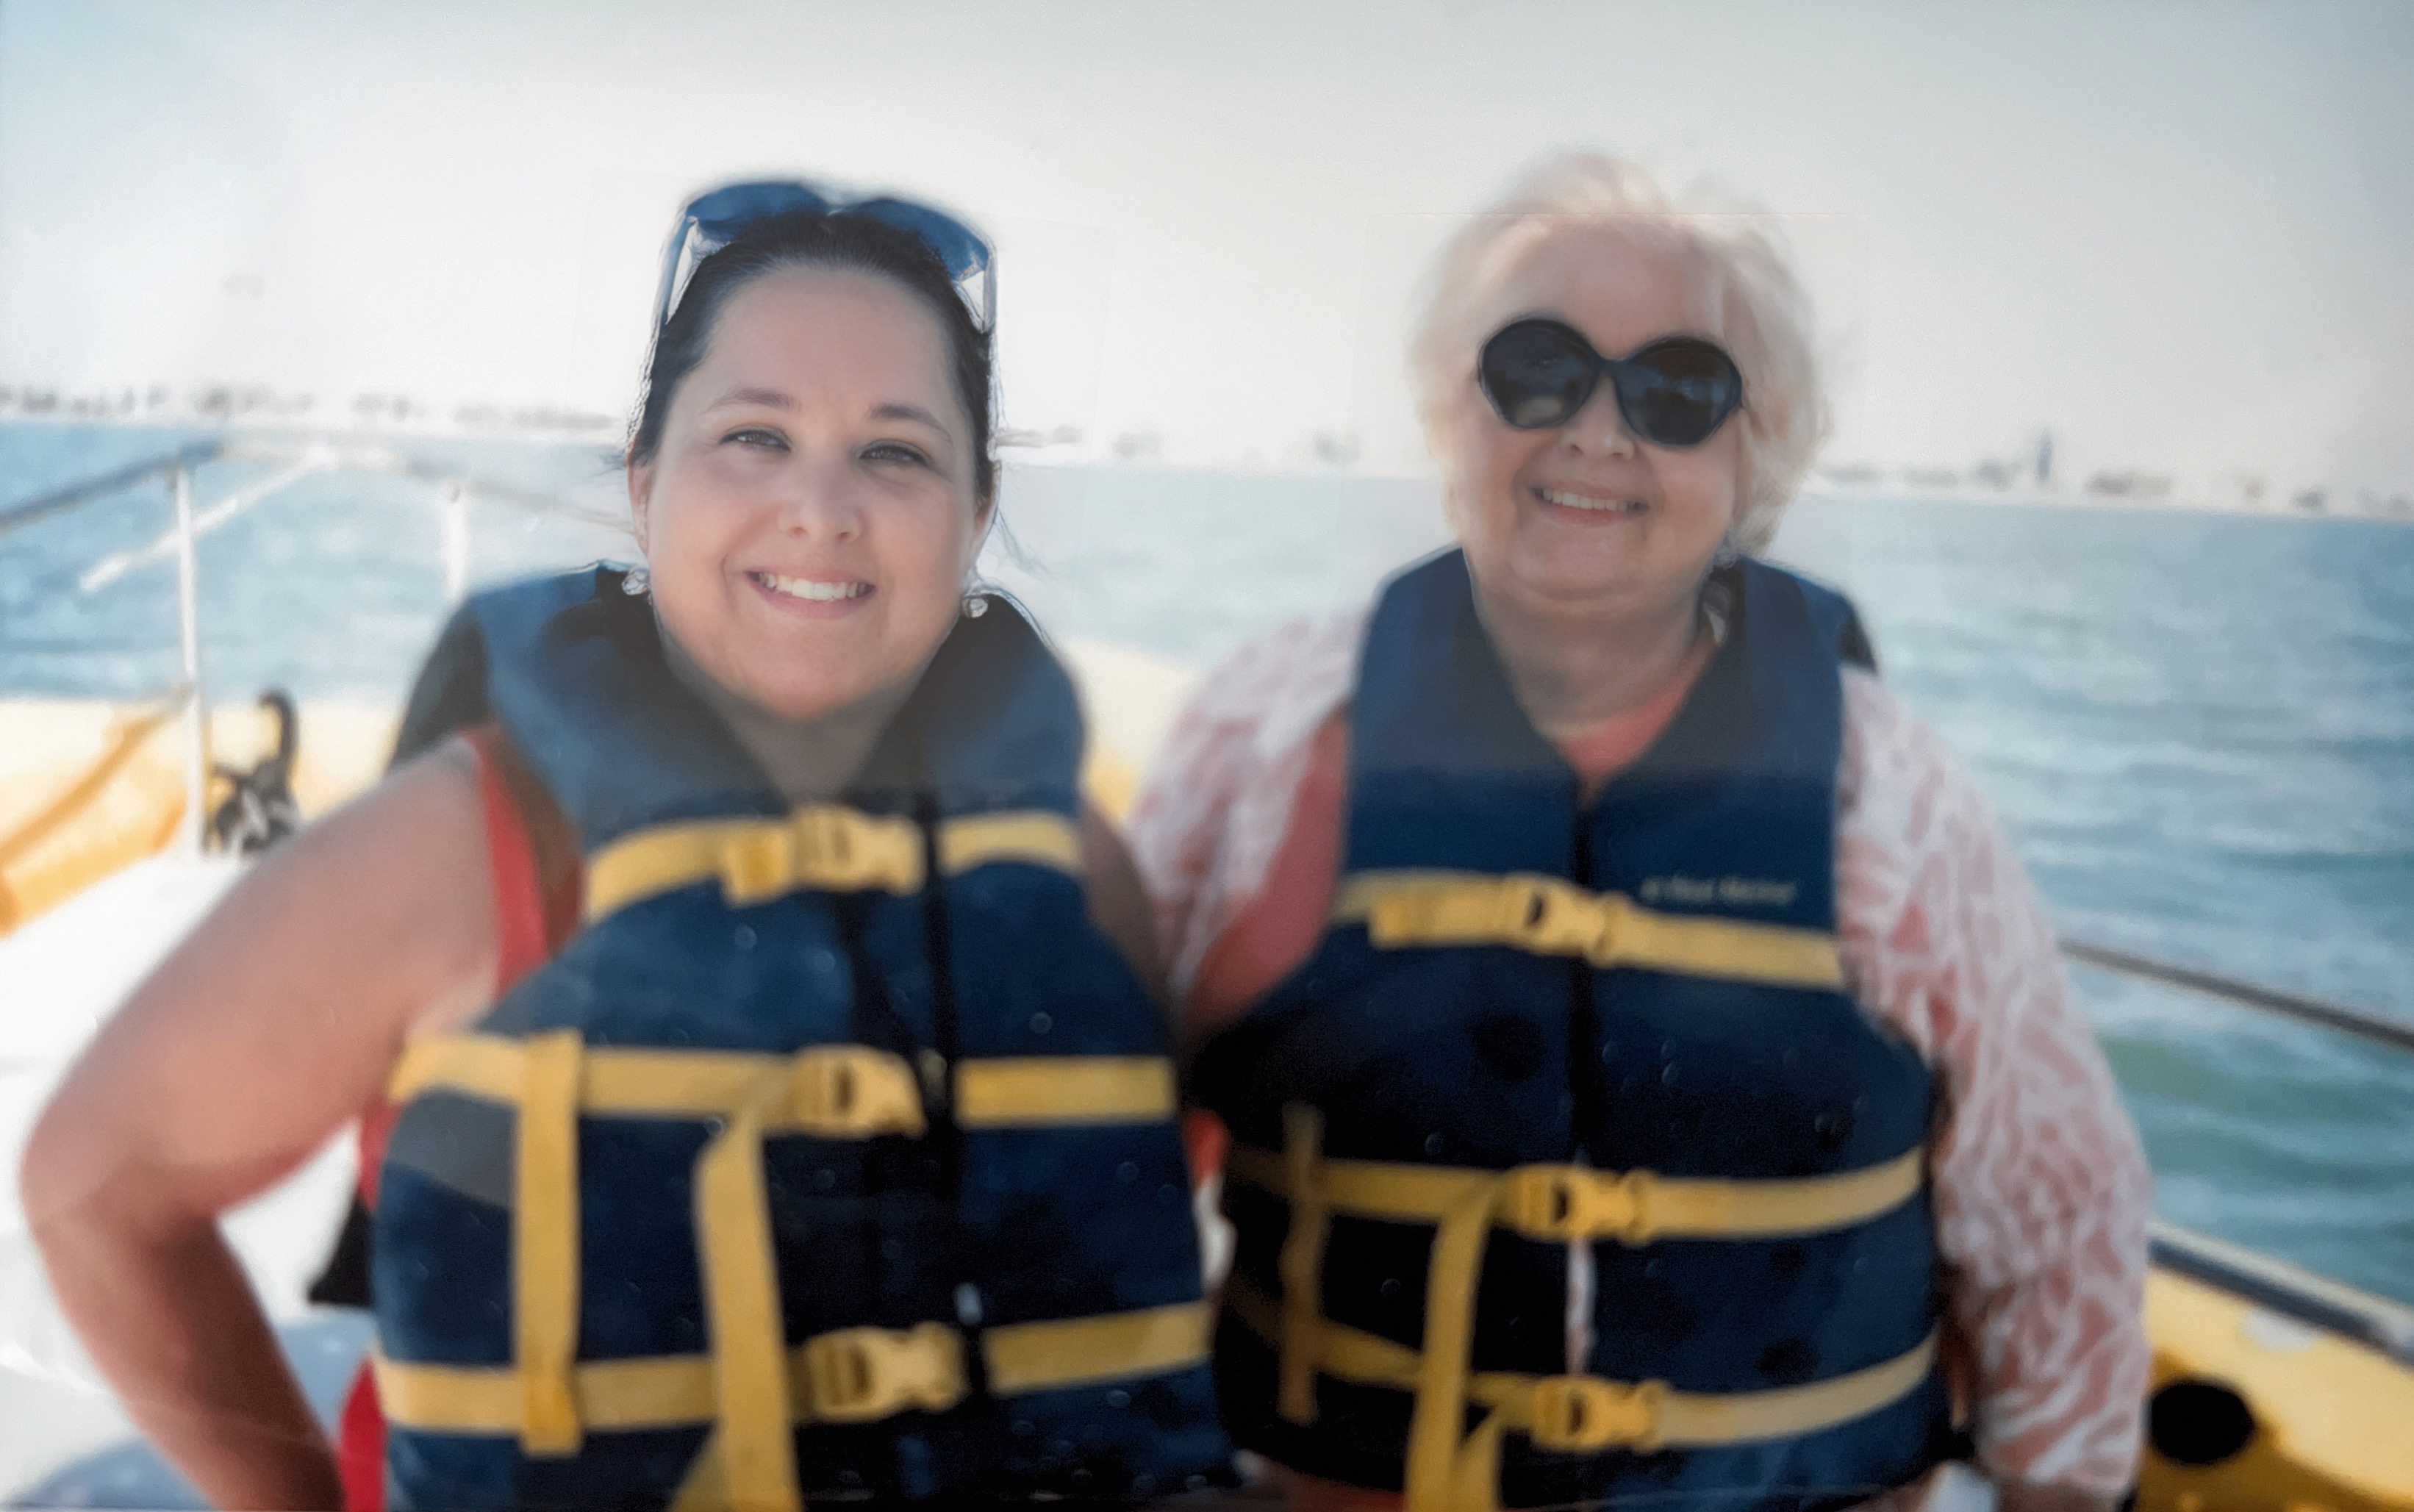 Laurie with mom. Moms para sailing for the first time at 79 years old!  2016